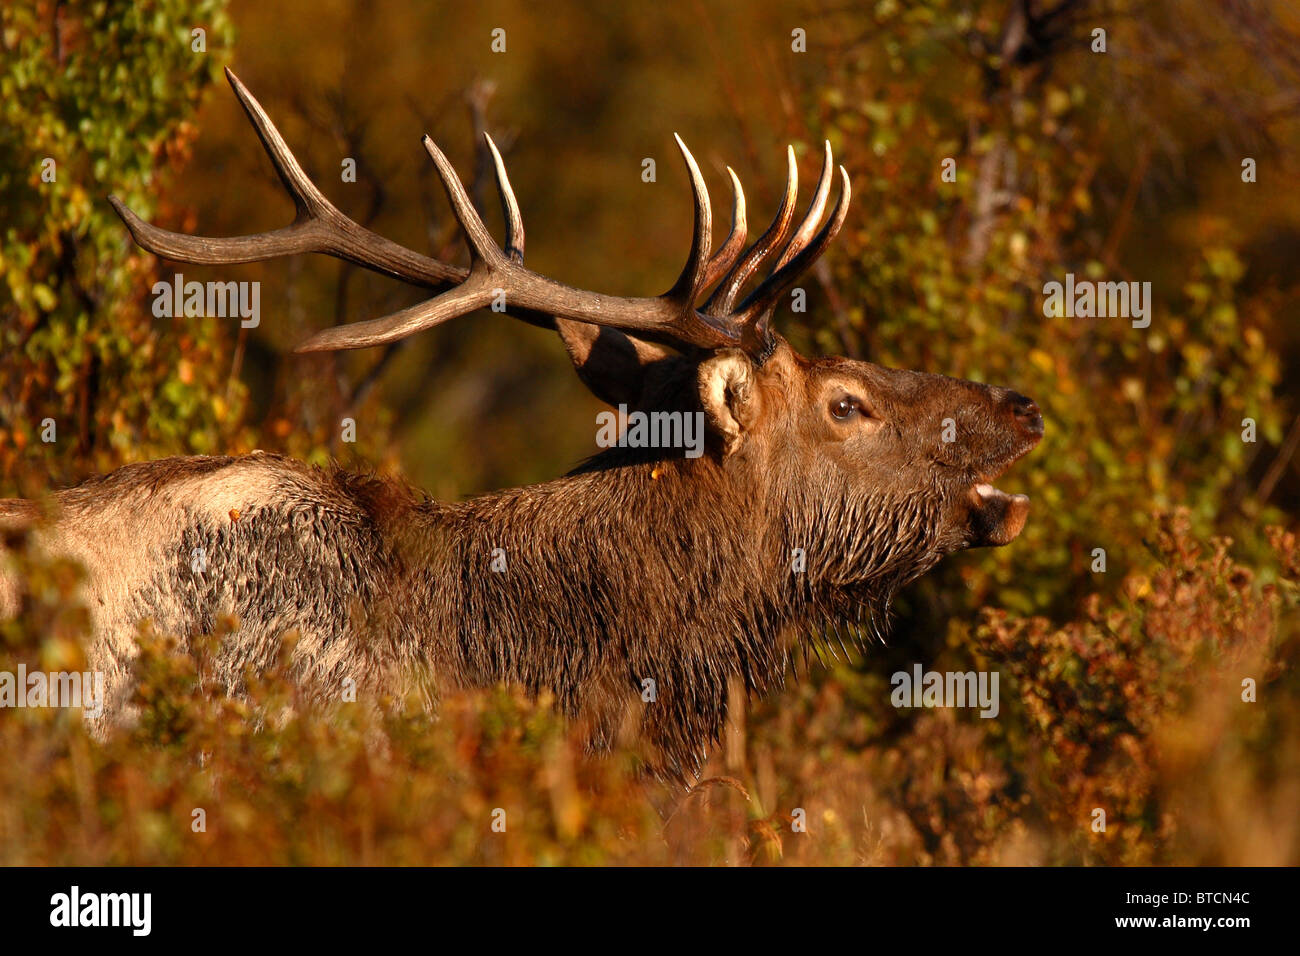 An Elk bugling during the autumn rut in Colorado. Stock Photo